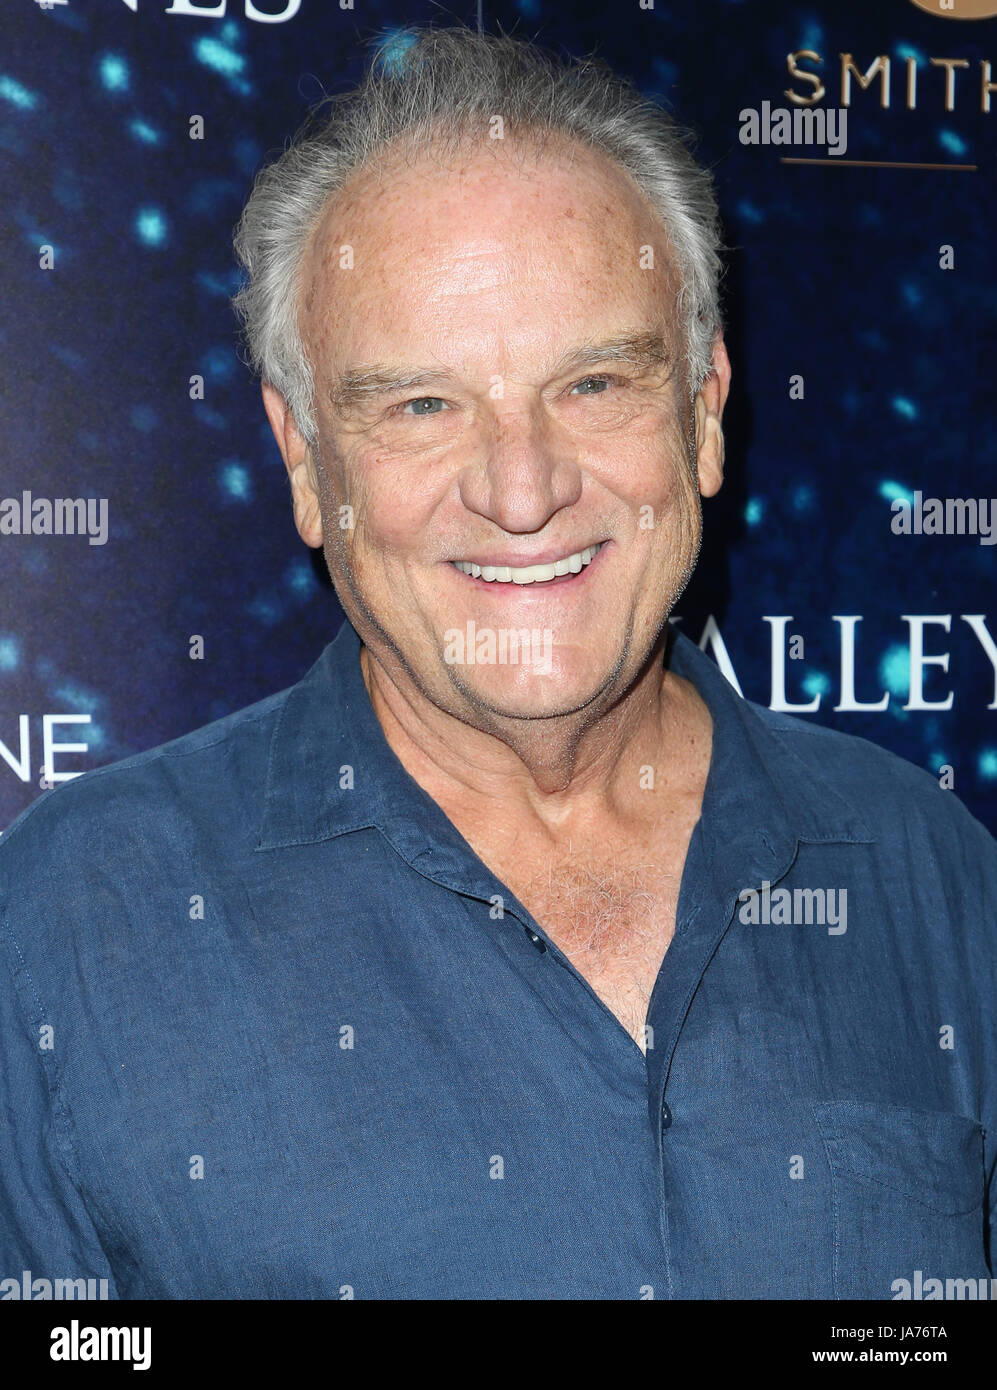 Hollywood, Ca. 24th Aug, 2017. Bill Smitrovich, At Valley Of Bones World Premiere Of Fame At ArcLight Hollywood In California on August 24, 2017. Credit: Fs/Media Punch/Alamy Live News Stock Photo